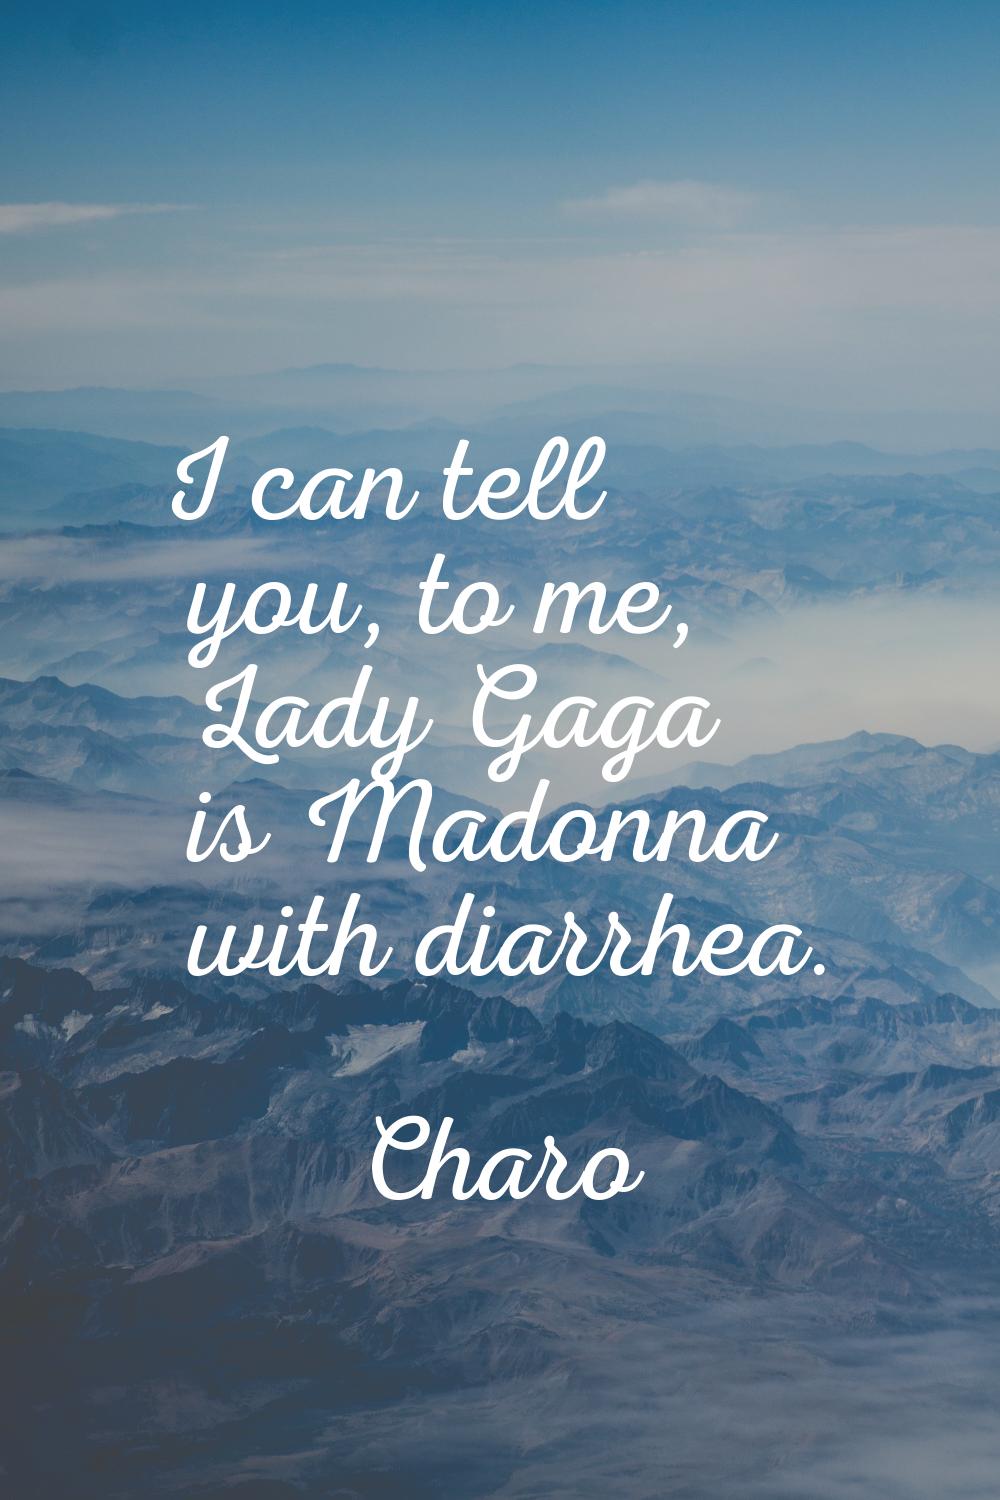 I can tell you, to me, Lady Gaga is Madonna with diarrhea.